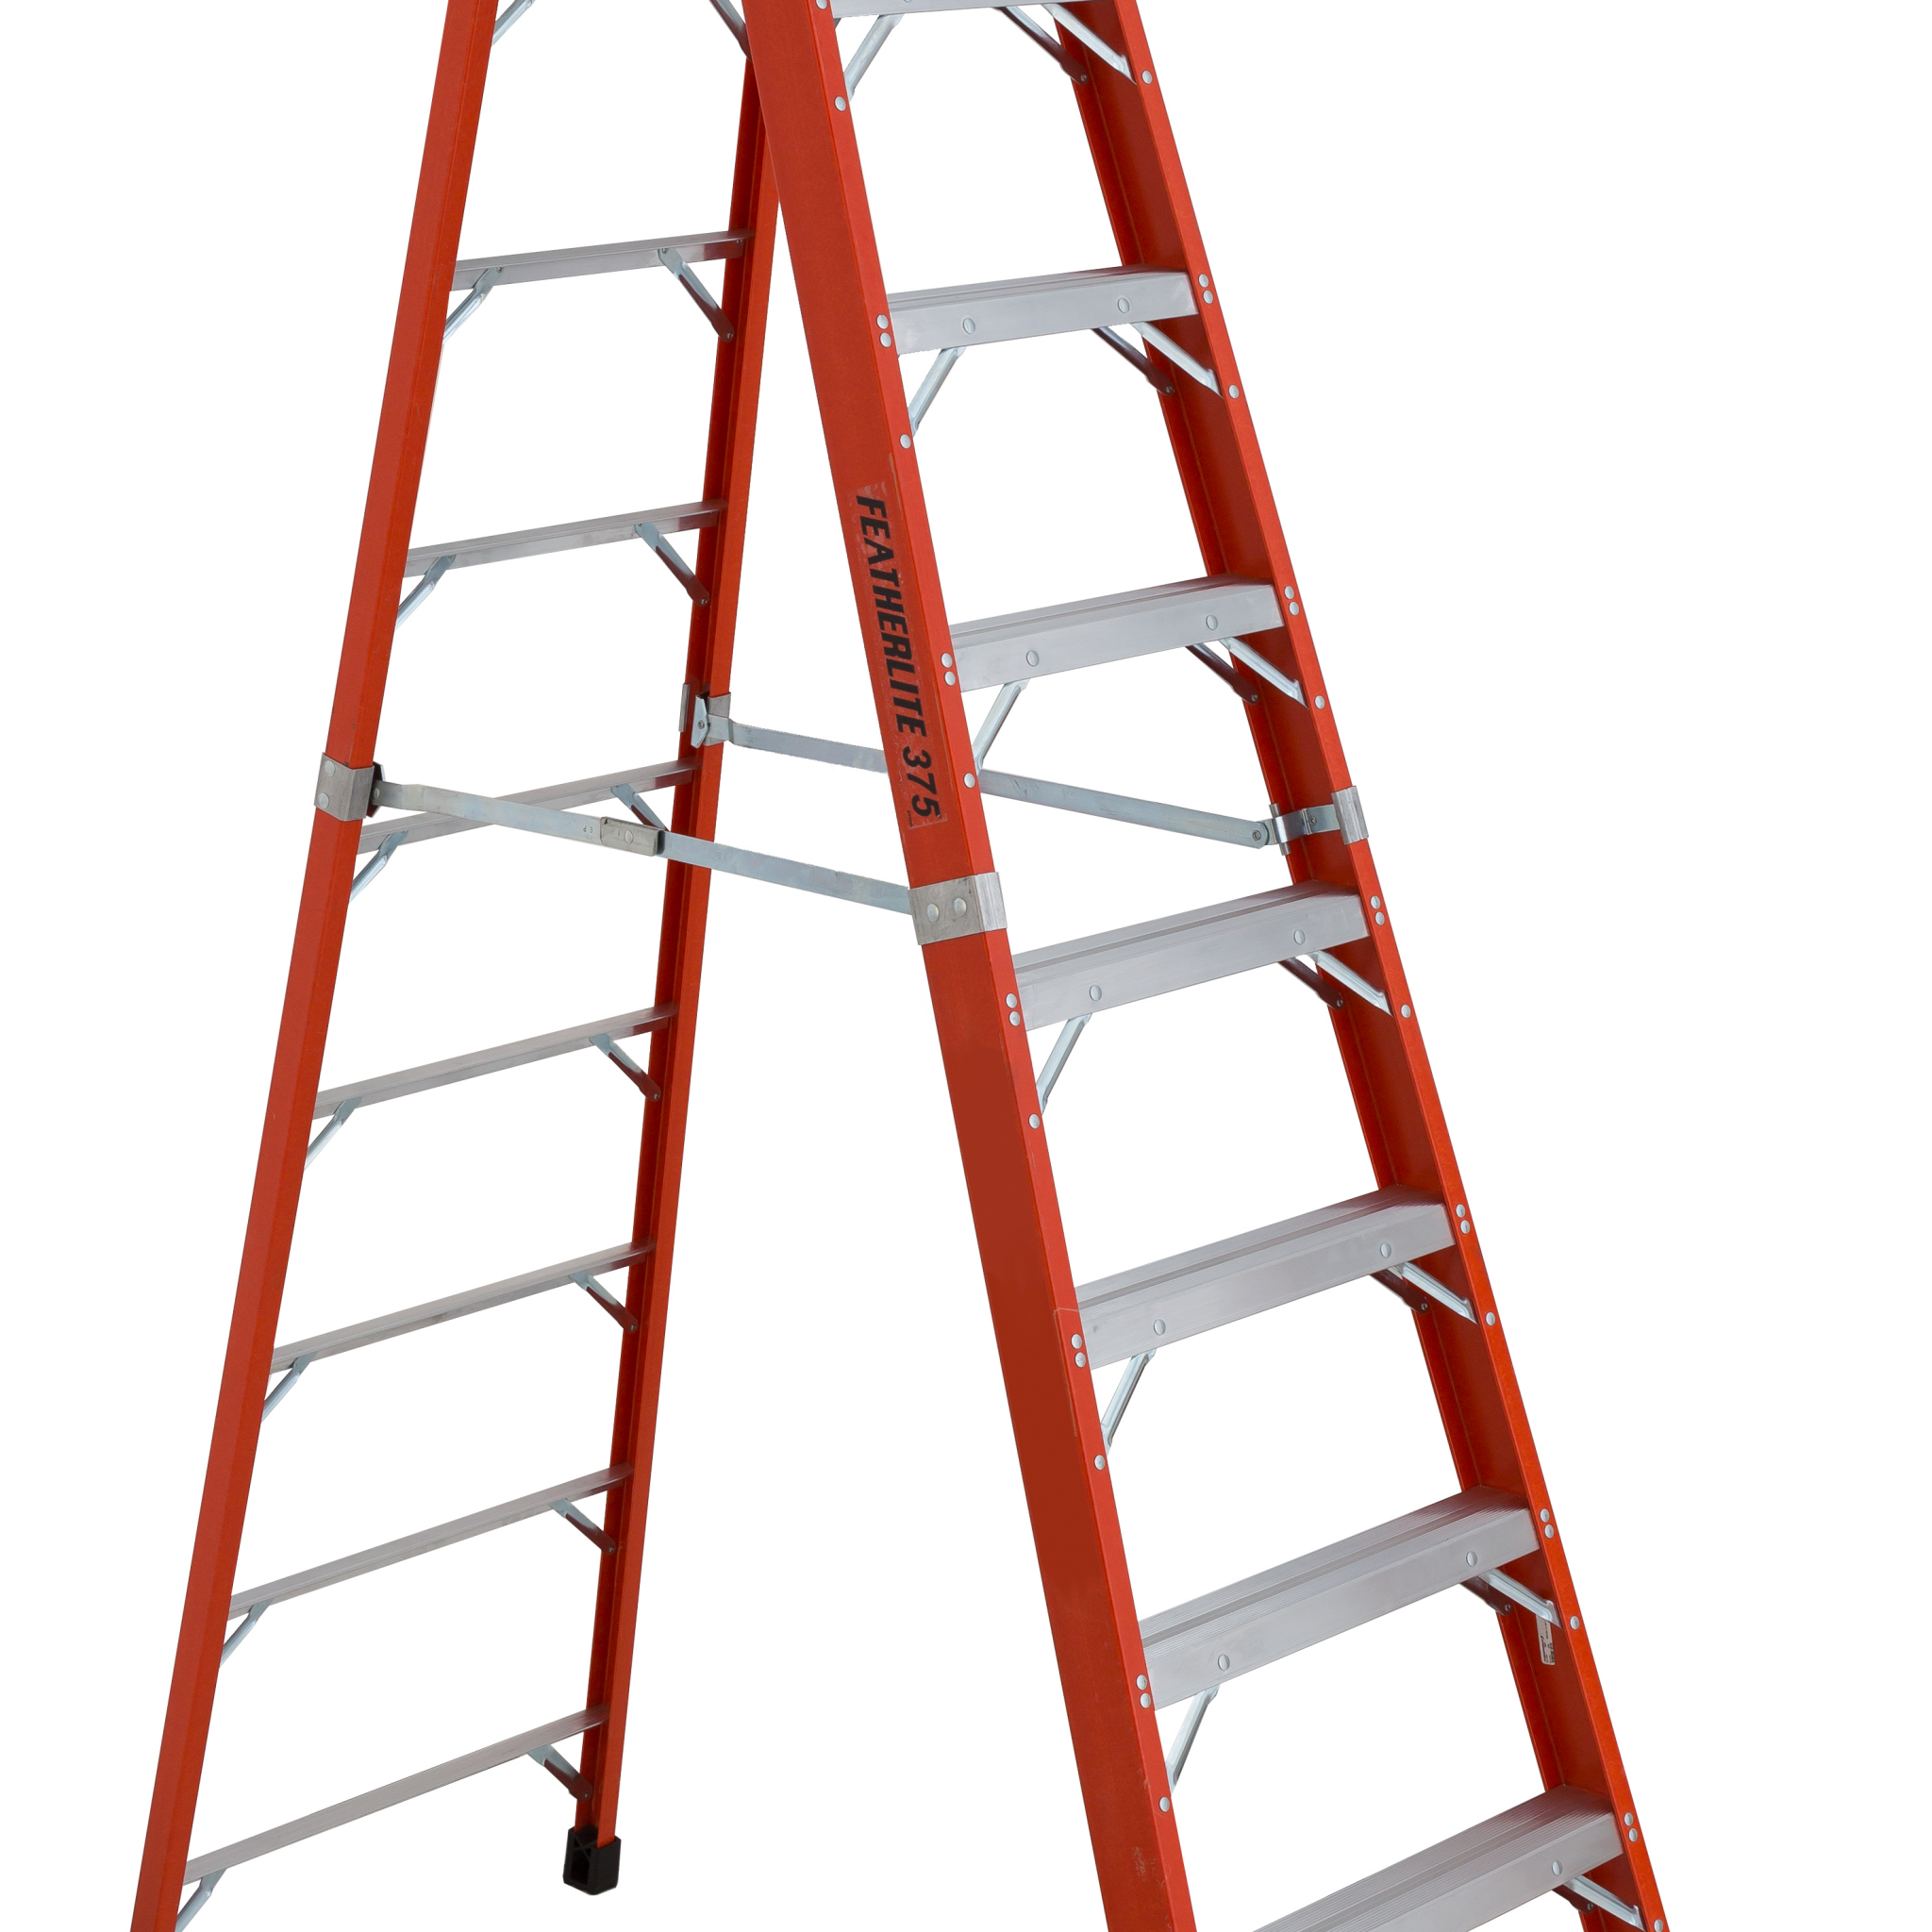 10' Extra Heavy Duty Brute Step Ladder #6810